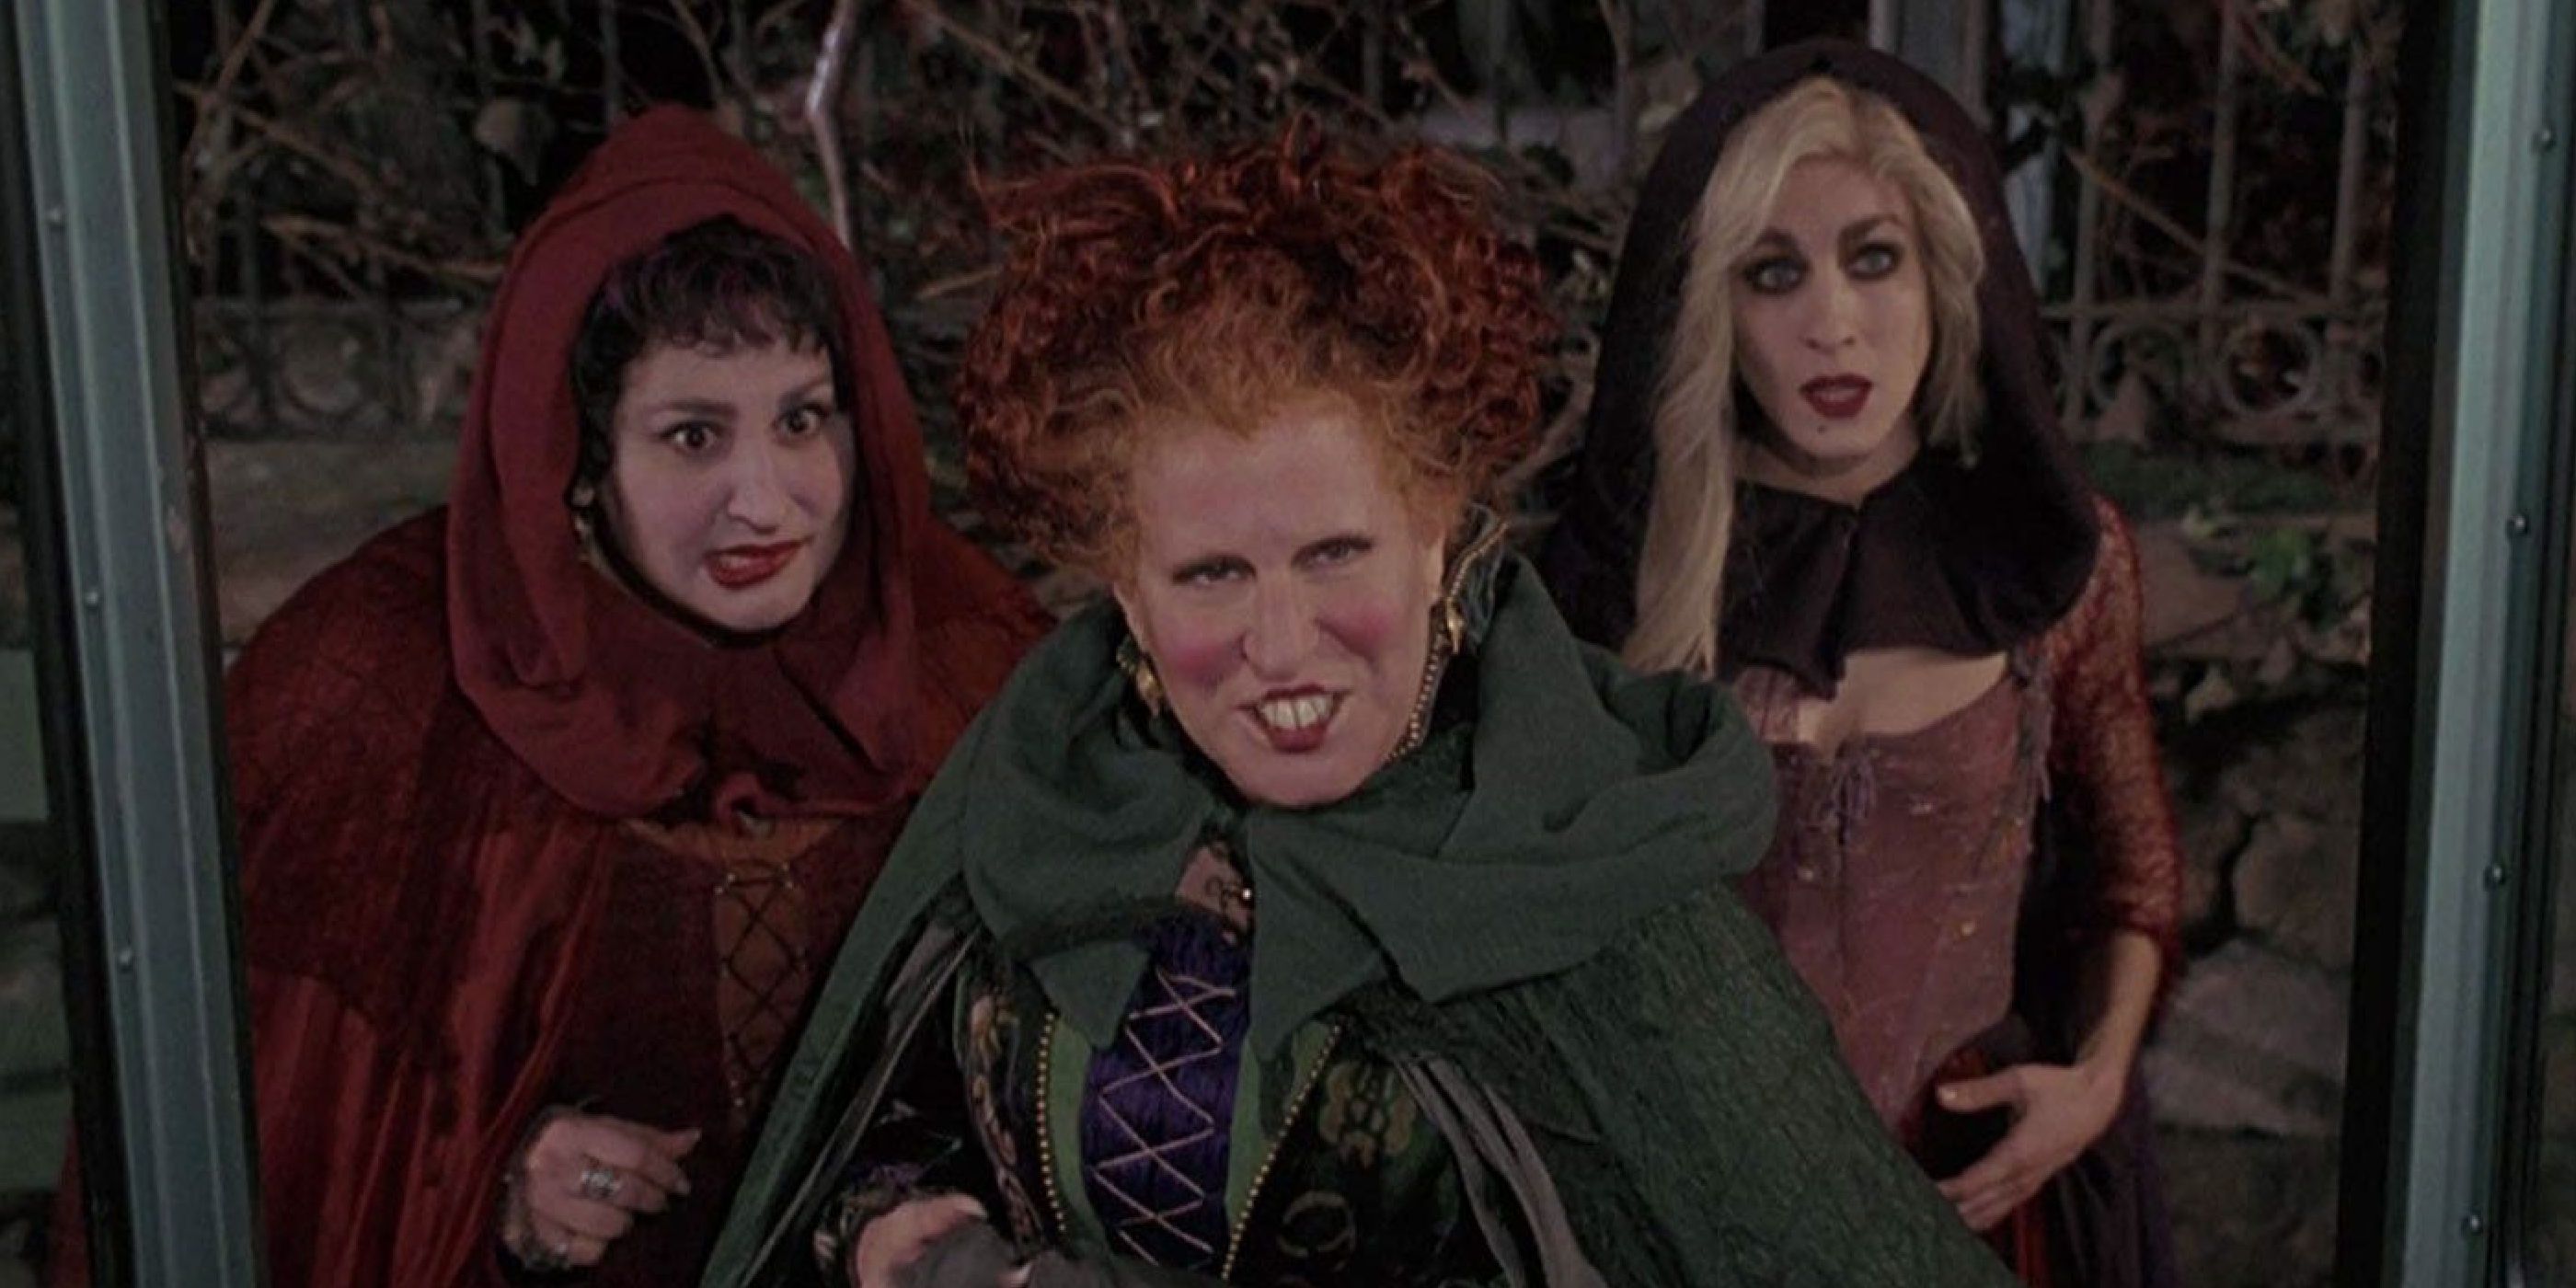 The sisters in the Hocus Pocus Movie